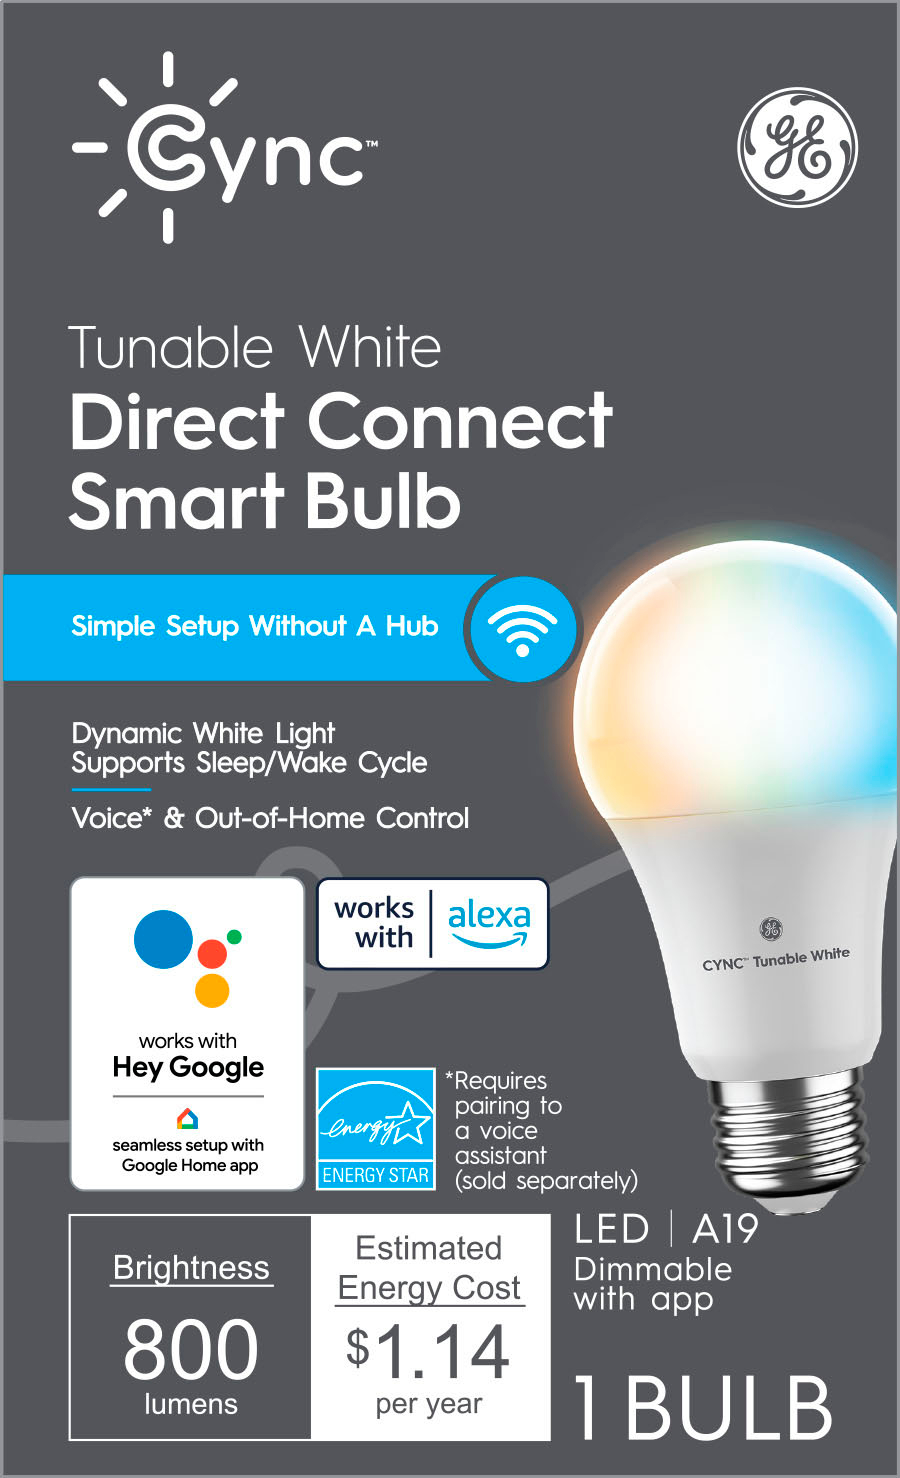 GE - Cync Tunable White Direct Connect Light Bulb (1 A19 Smart LED Light Bulb), 60W Replacement (Packaging May Vary) - Adjustable White